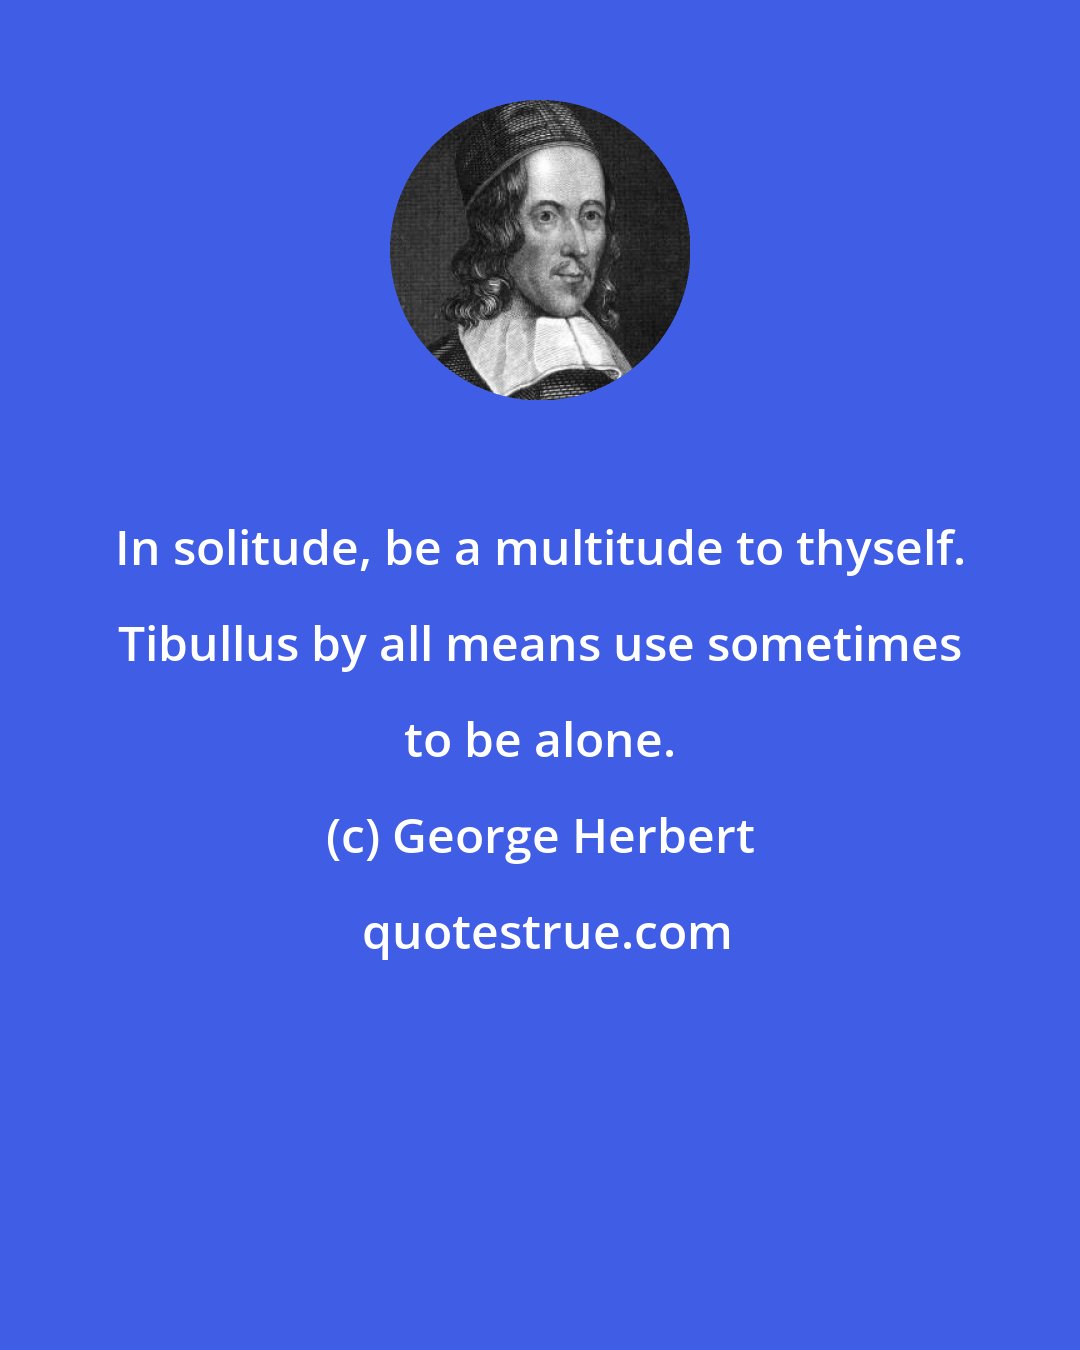 George Herbert: In solitude, be a multitude to thyself. Tibullus by all means use sometimes to be alone.